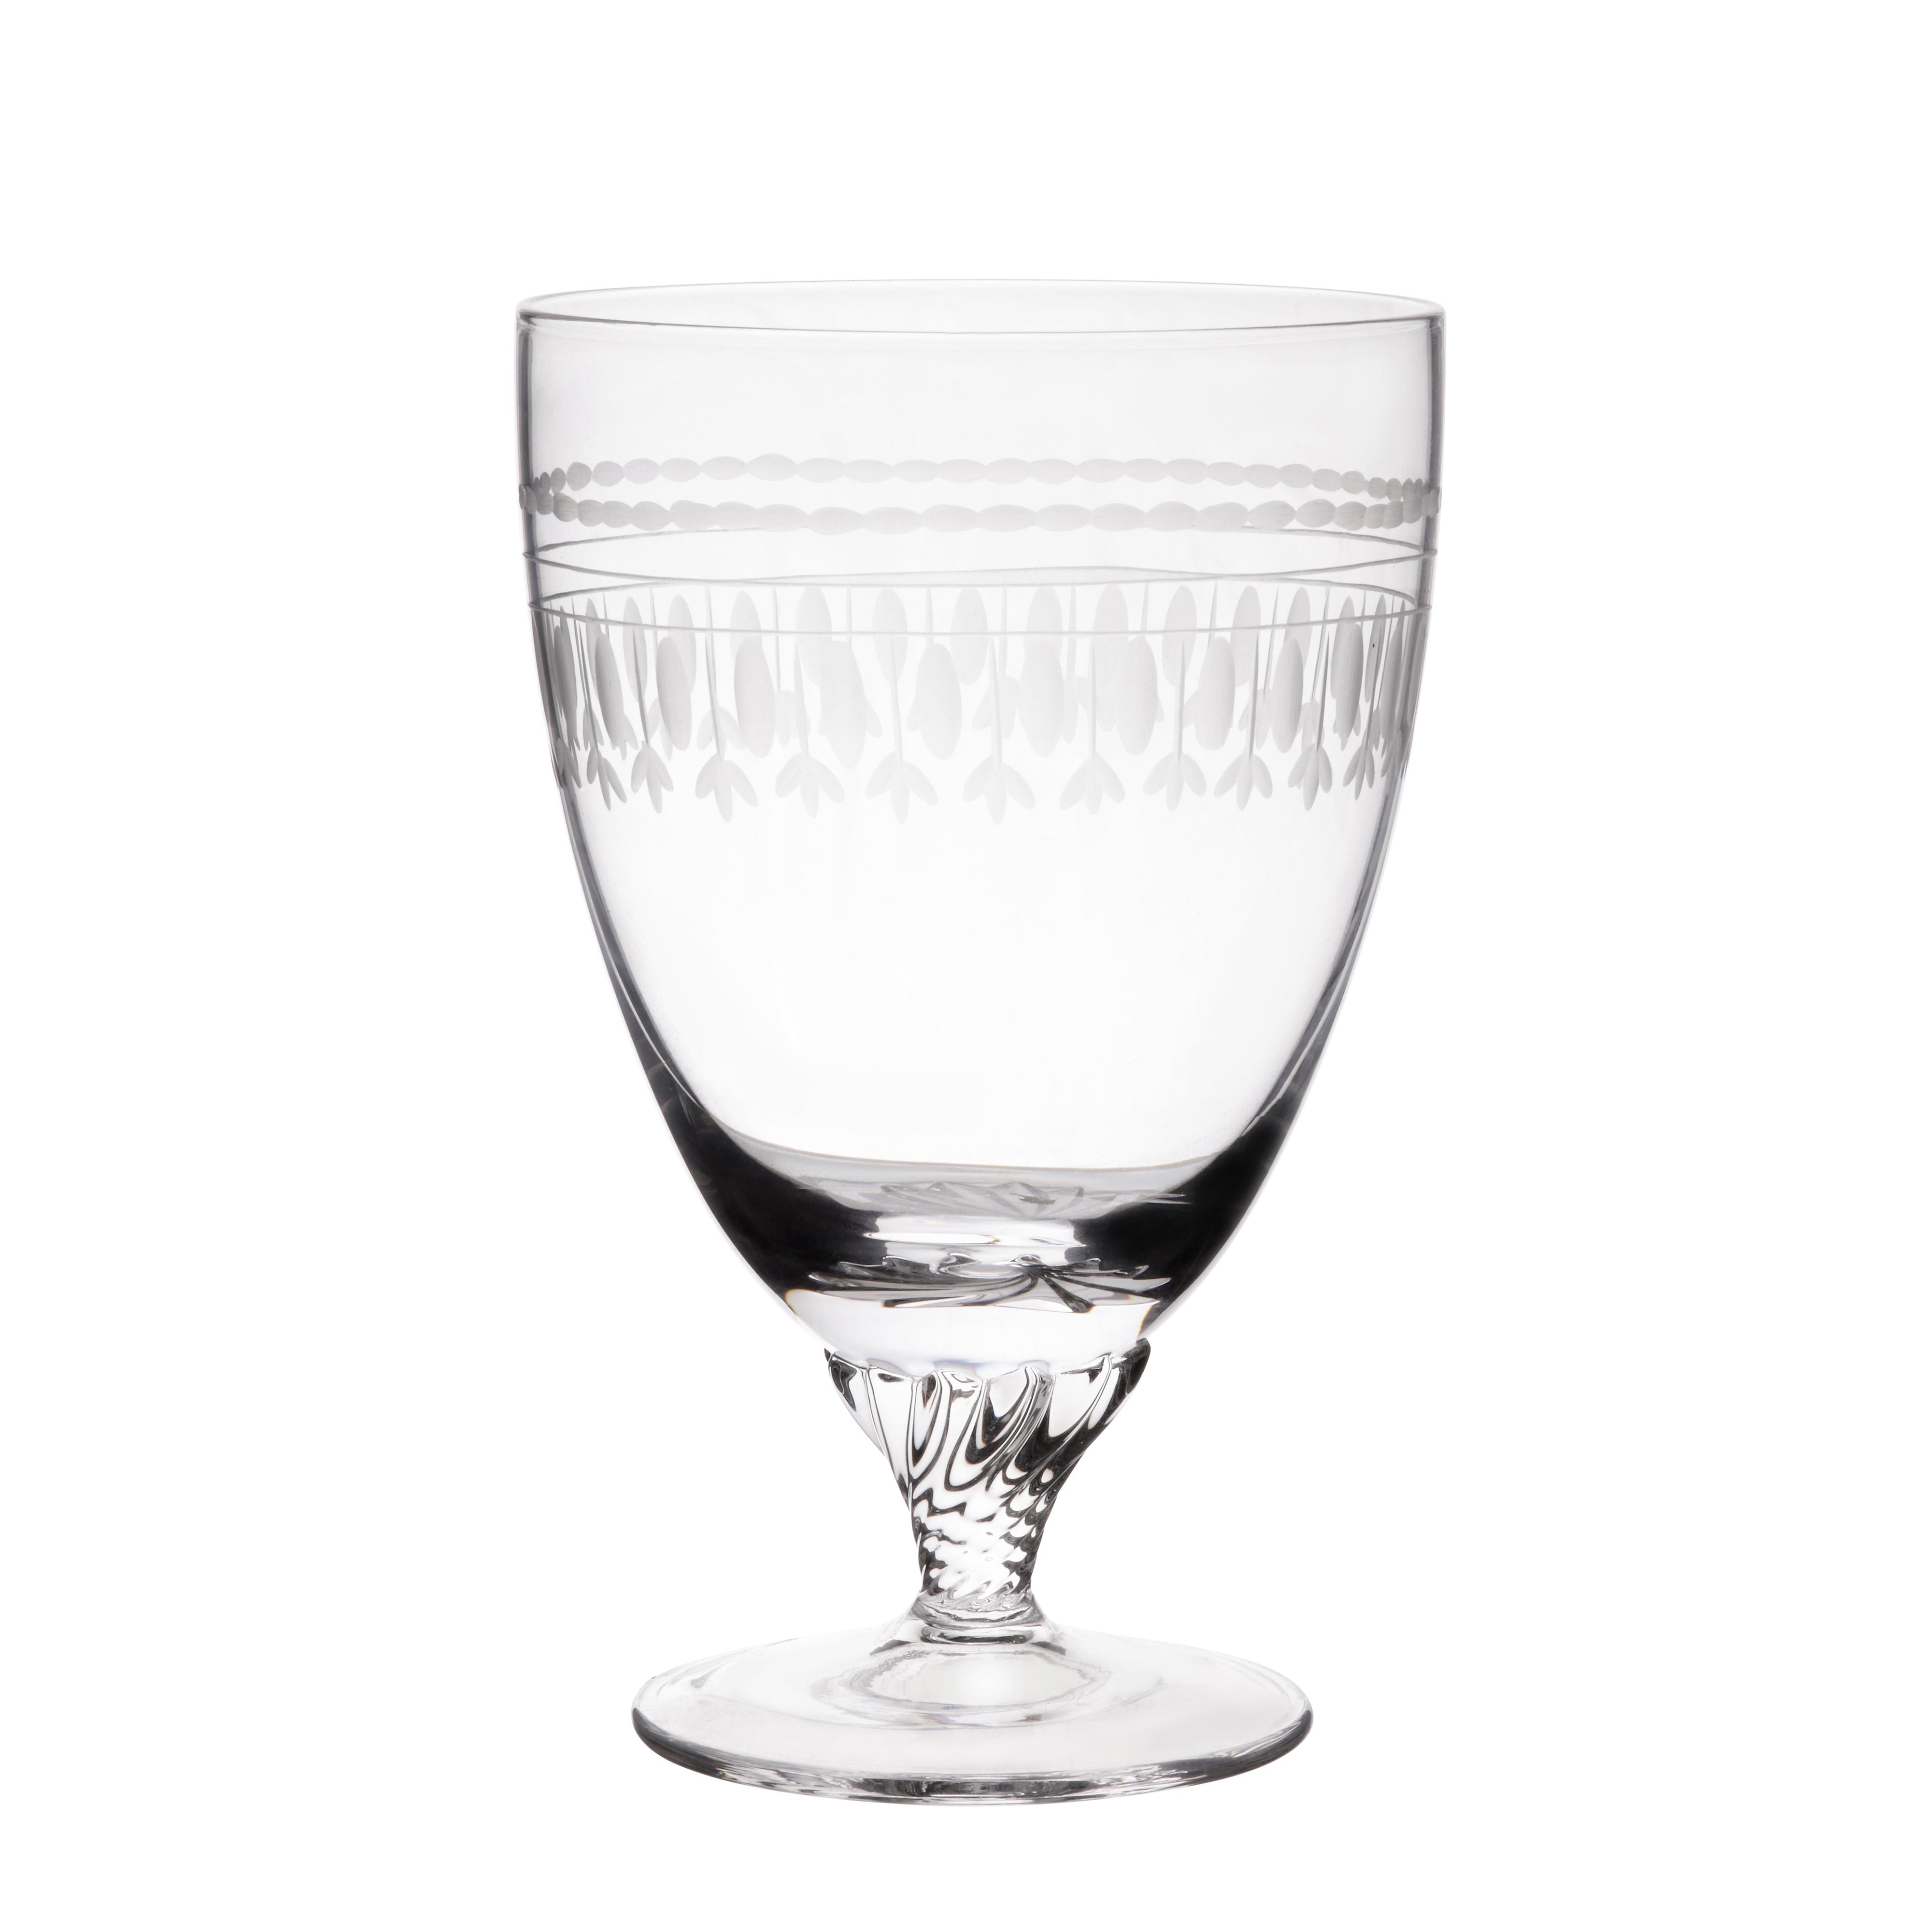 The Vintage List A Set of Four Crystal Highballs with Ovals Design